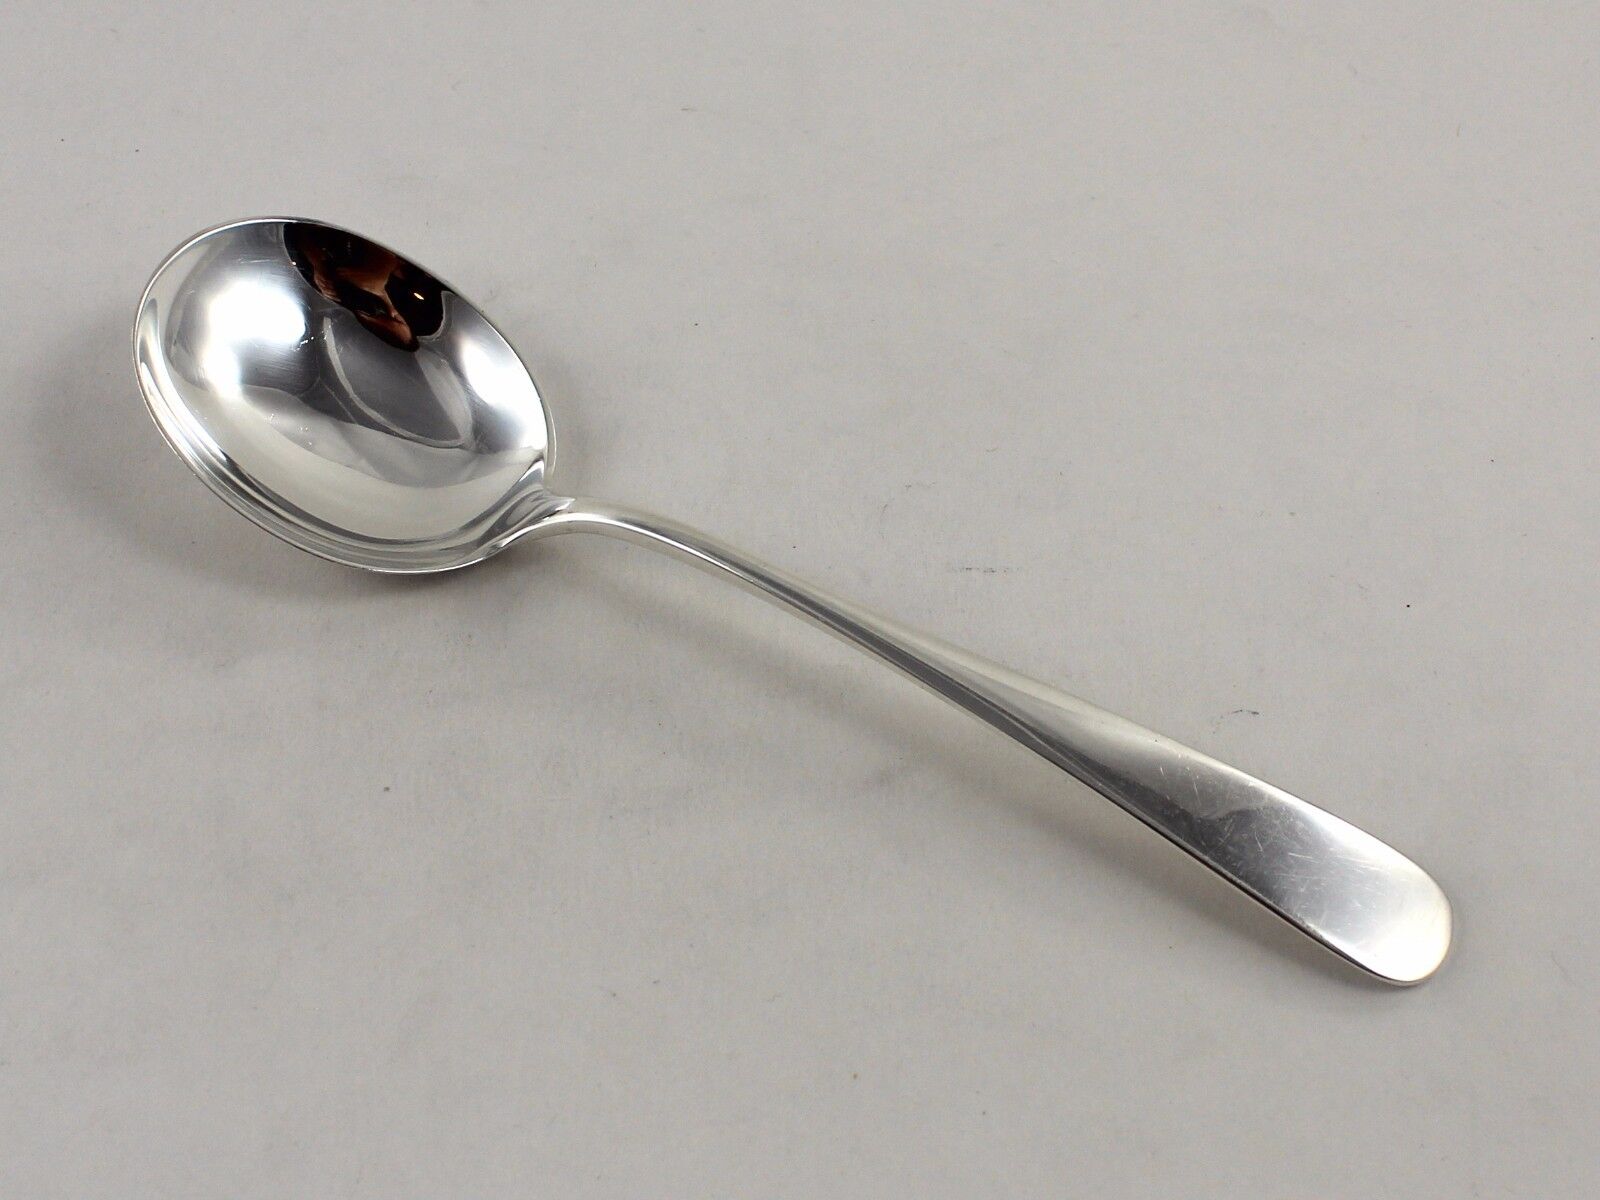 Kirk Old Maryland Plain Sterling Silver Cream Soup Spoon - 6 1/4" - No Monogram